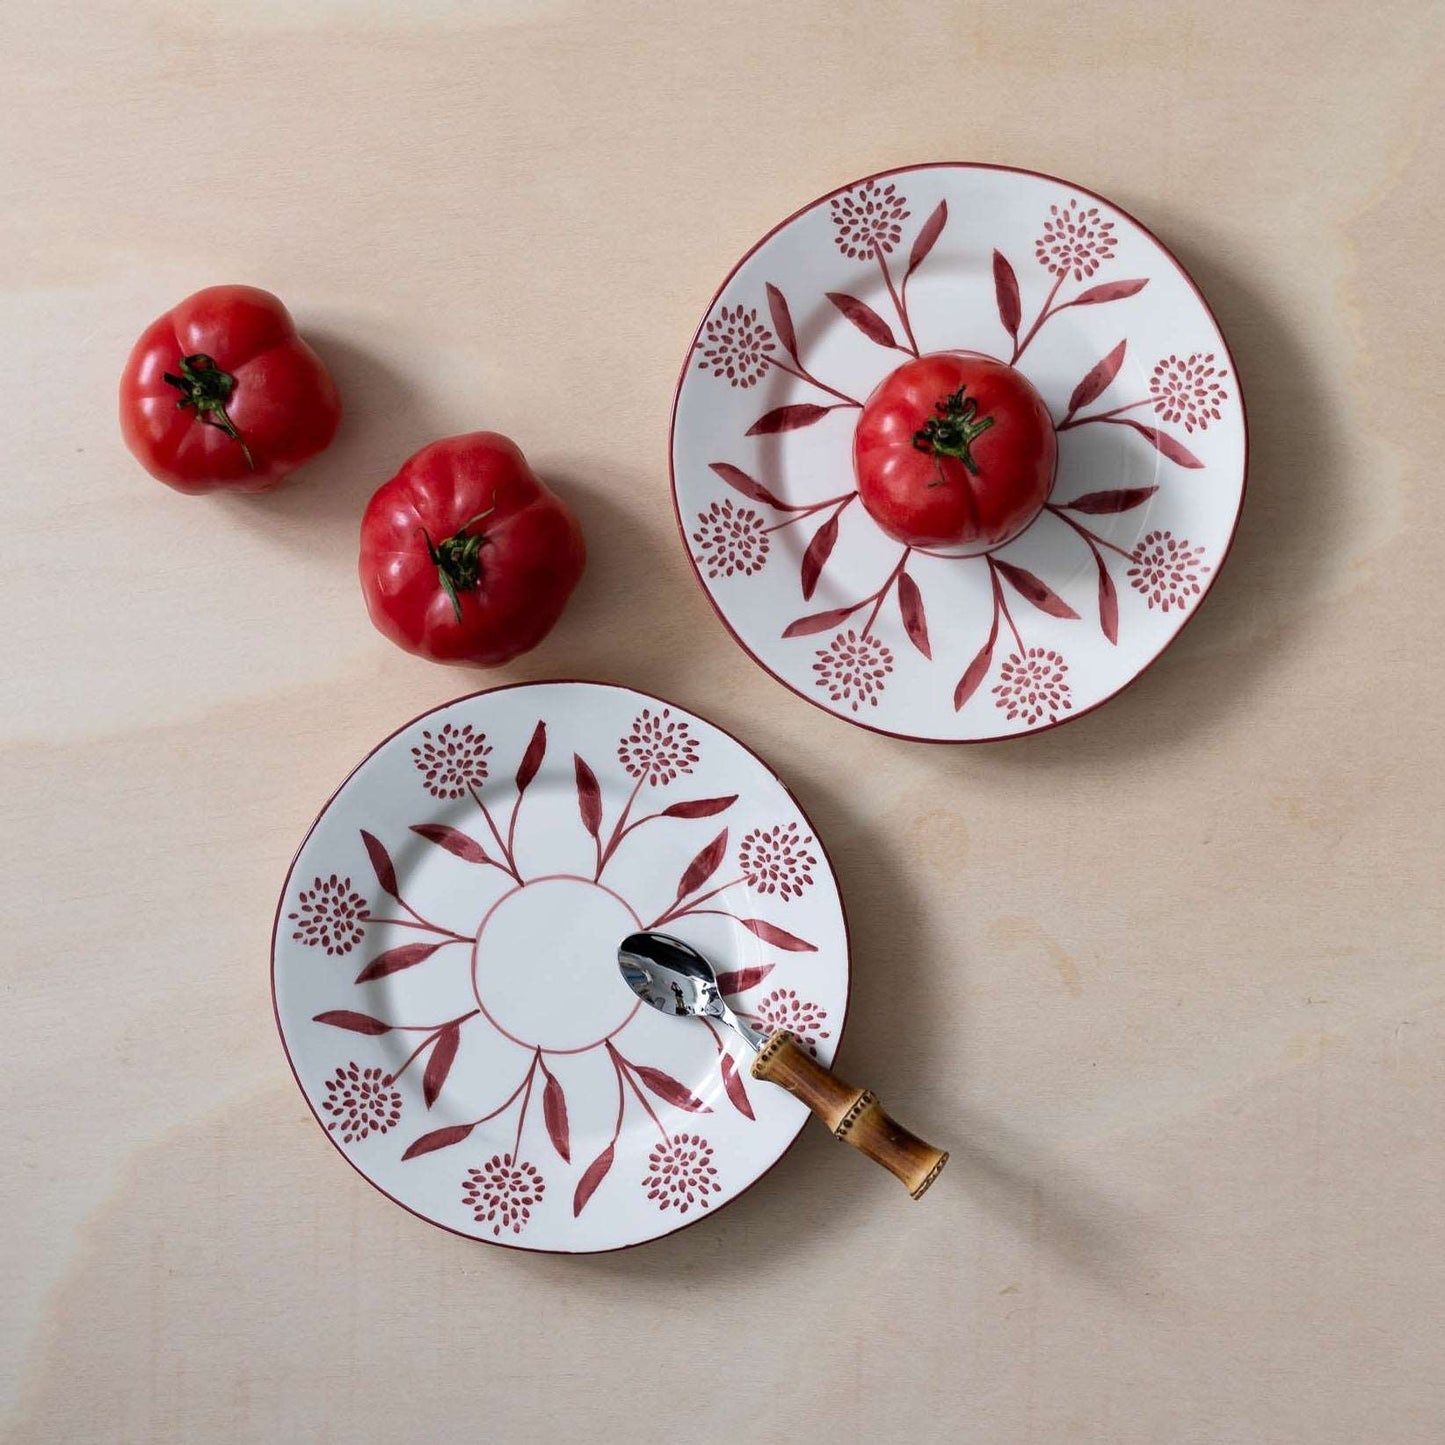 2 Cora Hand-Painted Ceramic Dessert Plate - Red and White - Matching with Bamboo Cutlery